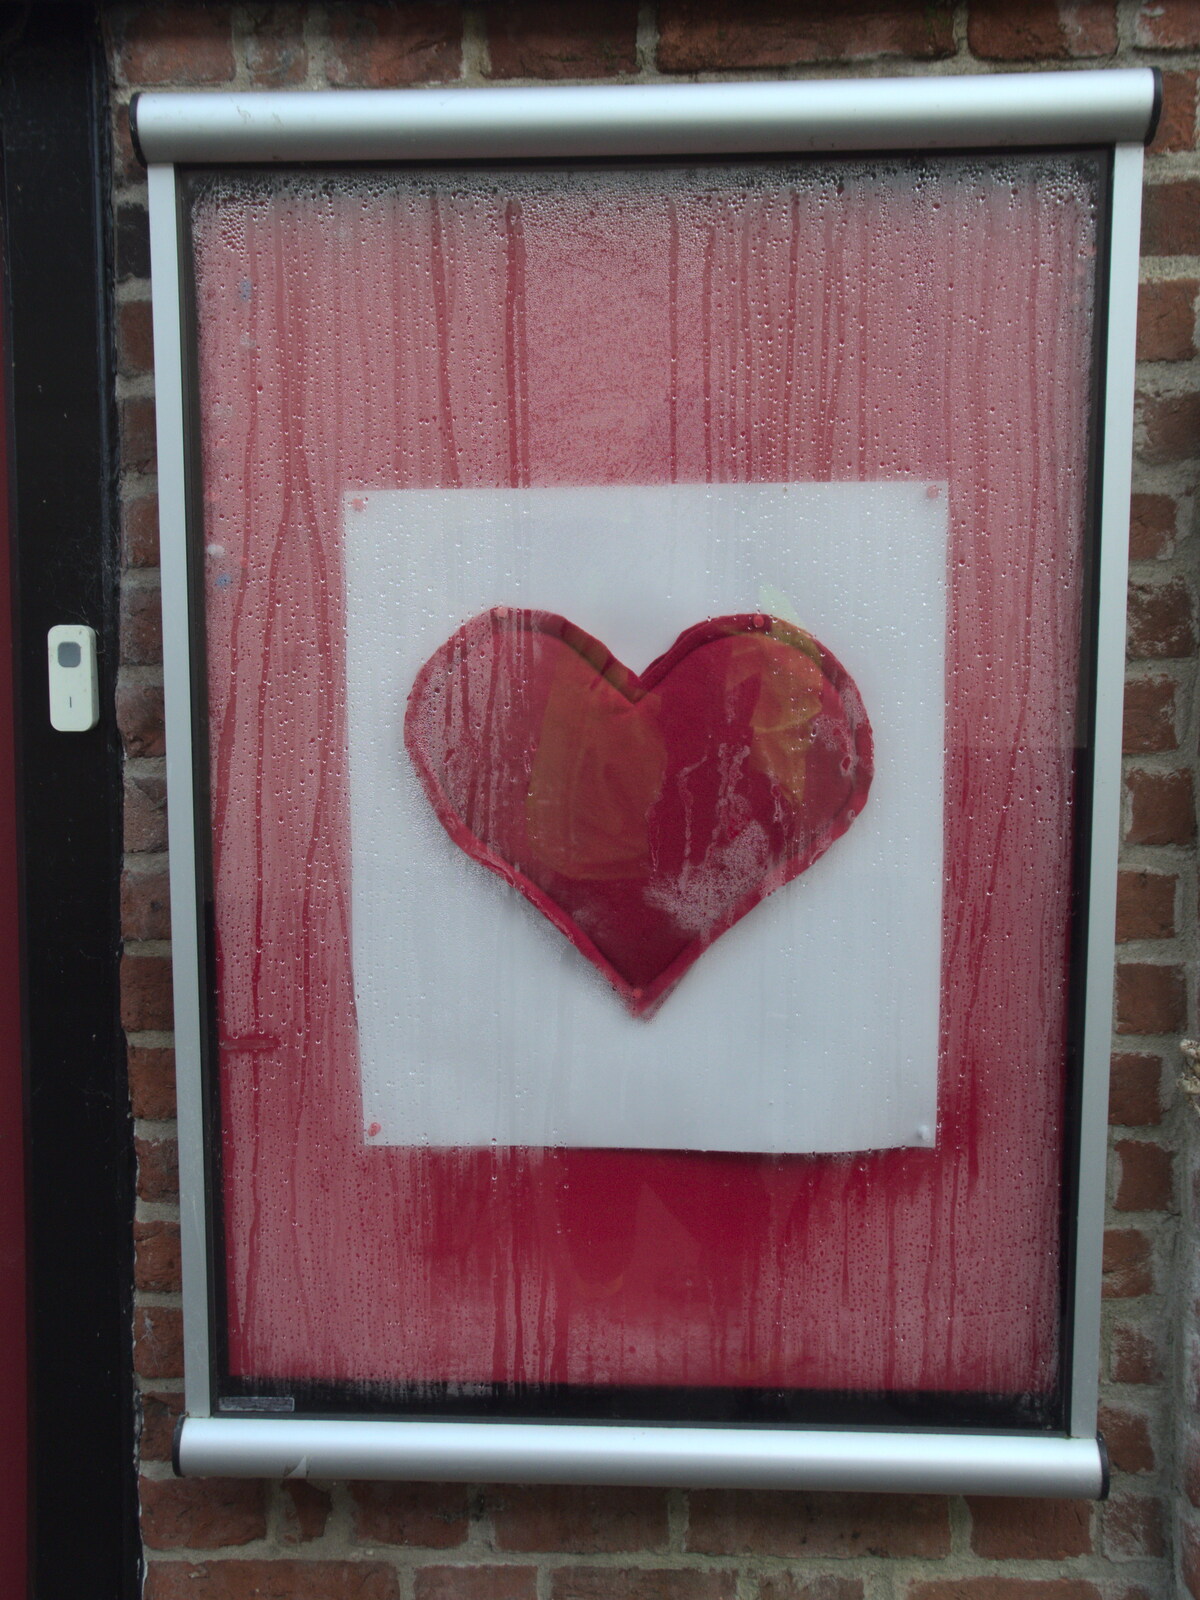 A red felt heart in a frame from The Mean Streets of Eye, Suffolk - 7th March 2021